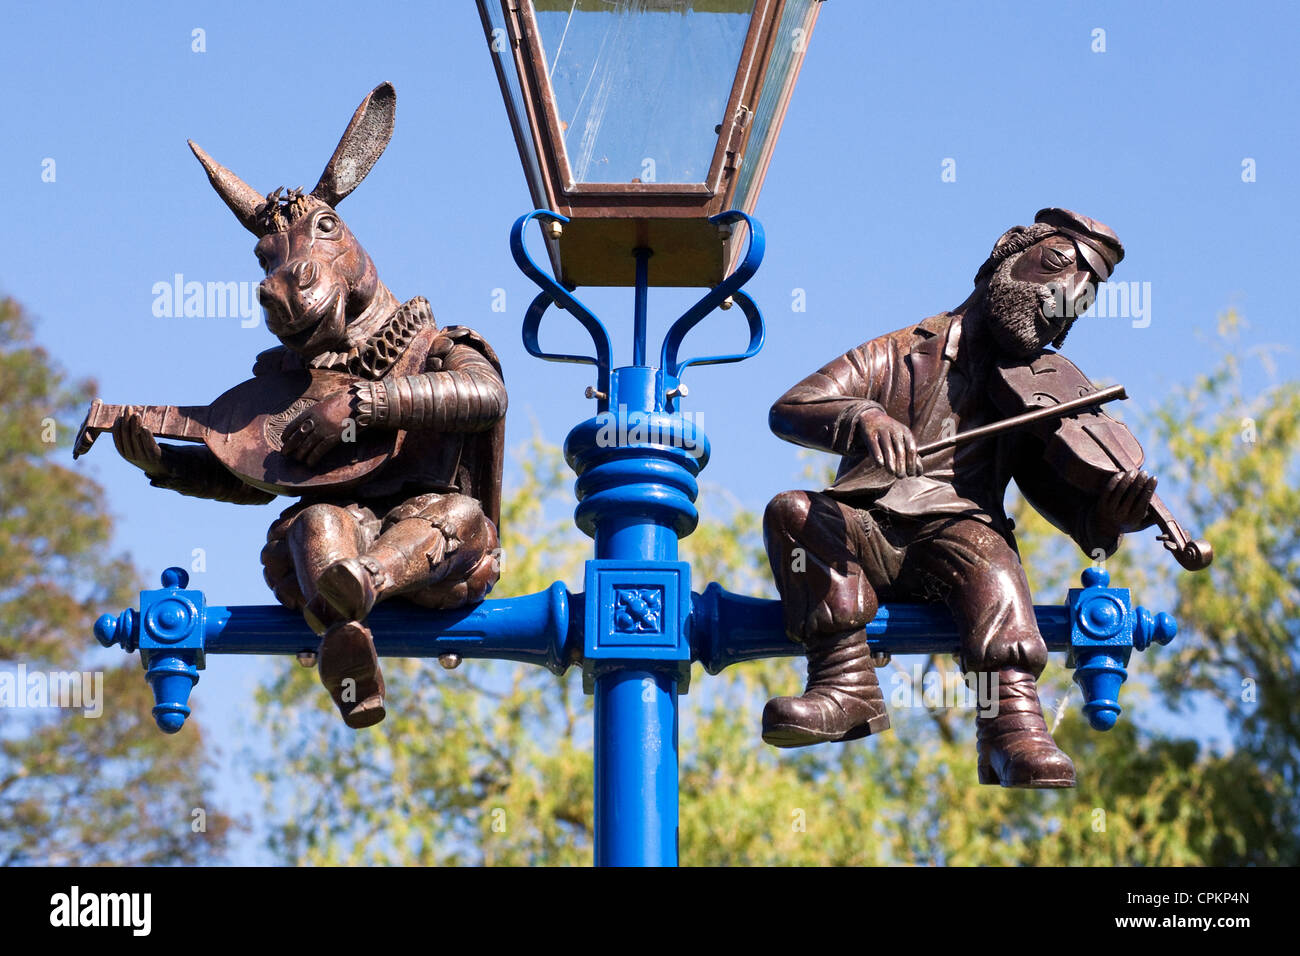 Lamp-post in Stratford upon Avon depicting Bottom and a traditional Jewish fiddler. Stock Photo